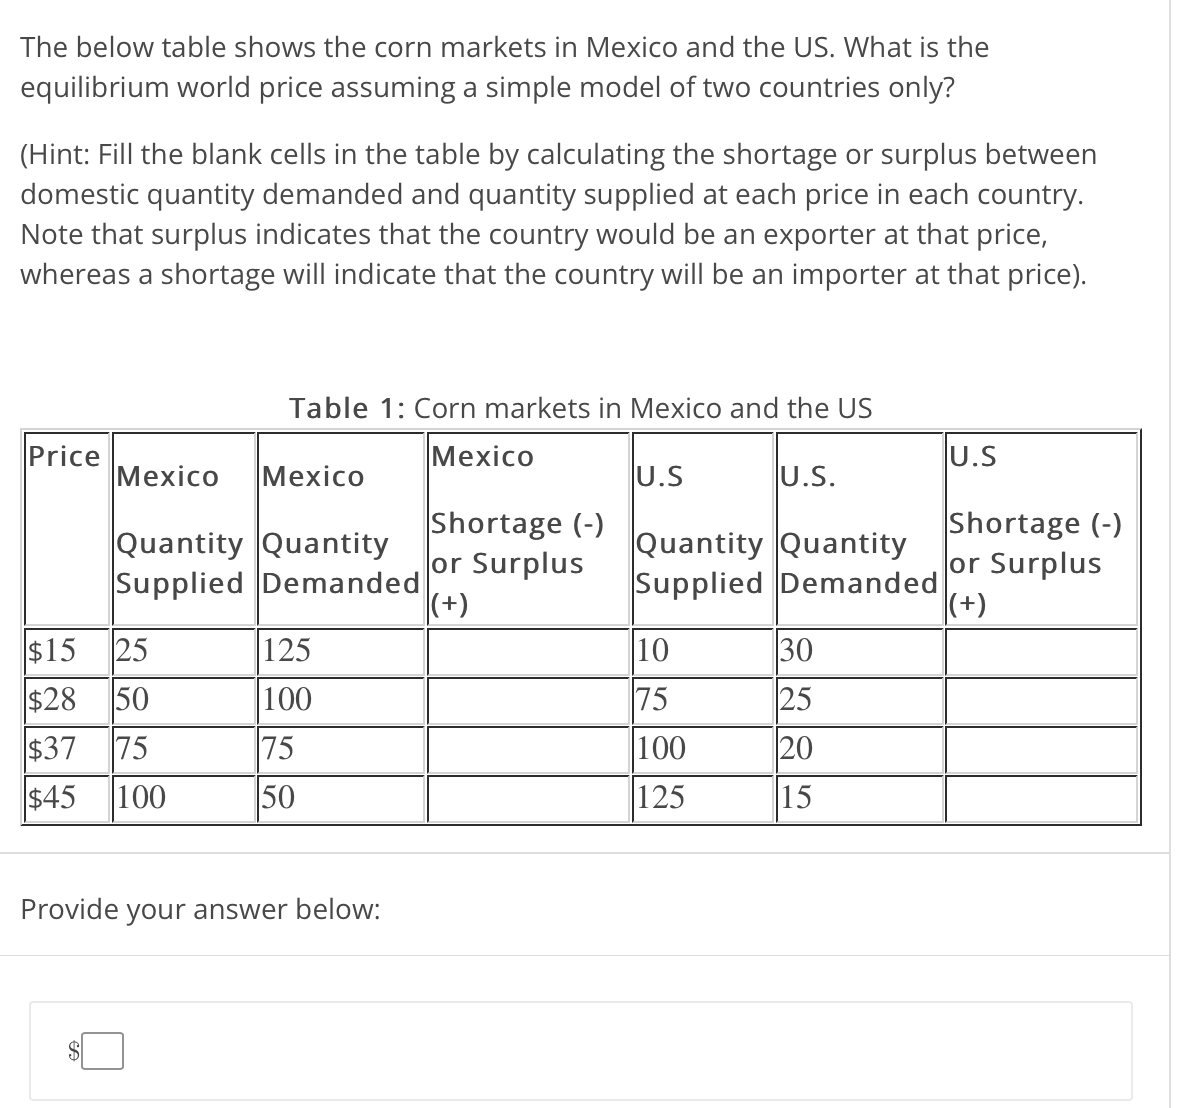 The below table shows the corn markets in Mexico and the US. What is the
equilibrium world price assuming a simple model of two countries only?
(Hint: Fill the blank cells in the table by calculating the shortage or surplus between
domestic quantity demanded and quantity supplied at each price in each country.
Note that surplus indicates that the country would be an exporter at that price,
whereas a shortage will indicate that the country will be an importer at that price).
Table 1: Corn markets in Mexico and the US
Price
Mexico
|Мexico
Mexico
U.S
U.S.
U.S
Quantity Quantity
Supplied Demanded
Shortage (-)
or Surplus
(+)
Quantity Quantity
Supplied Demanded
Shortage (-)
or Surplus
|(+)
$15
25
125
10
30
$28
50
100
75
25
$37
75
75
100
20
$45
100
50
125
|15
Provide your answer below:
